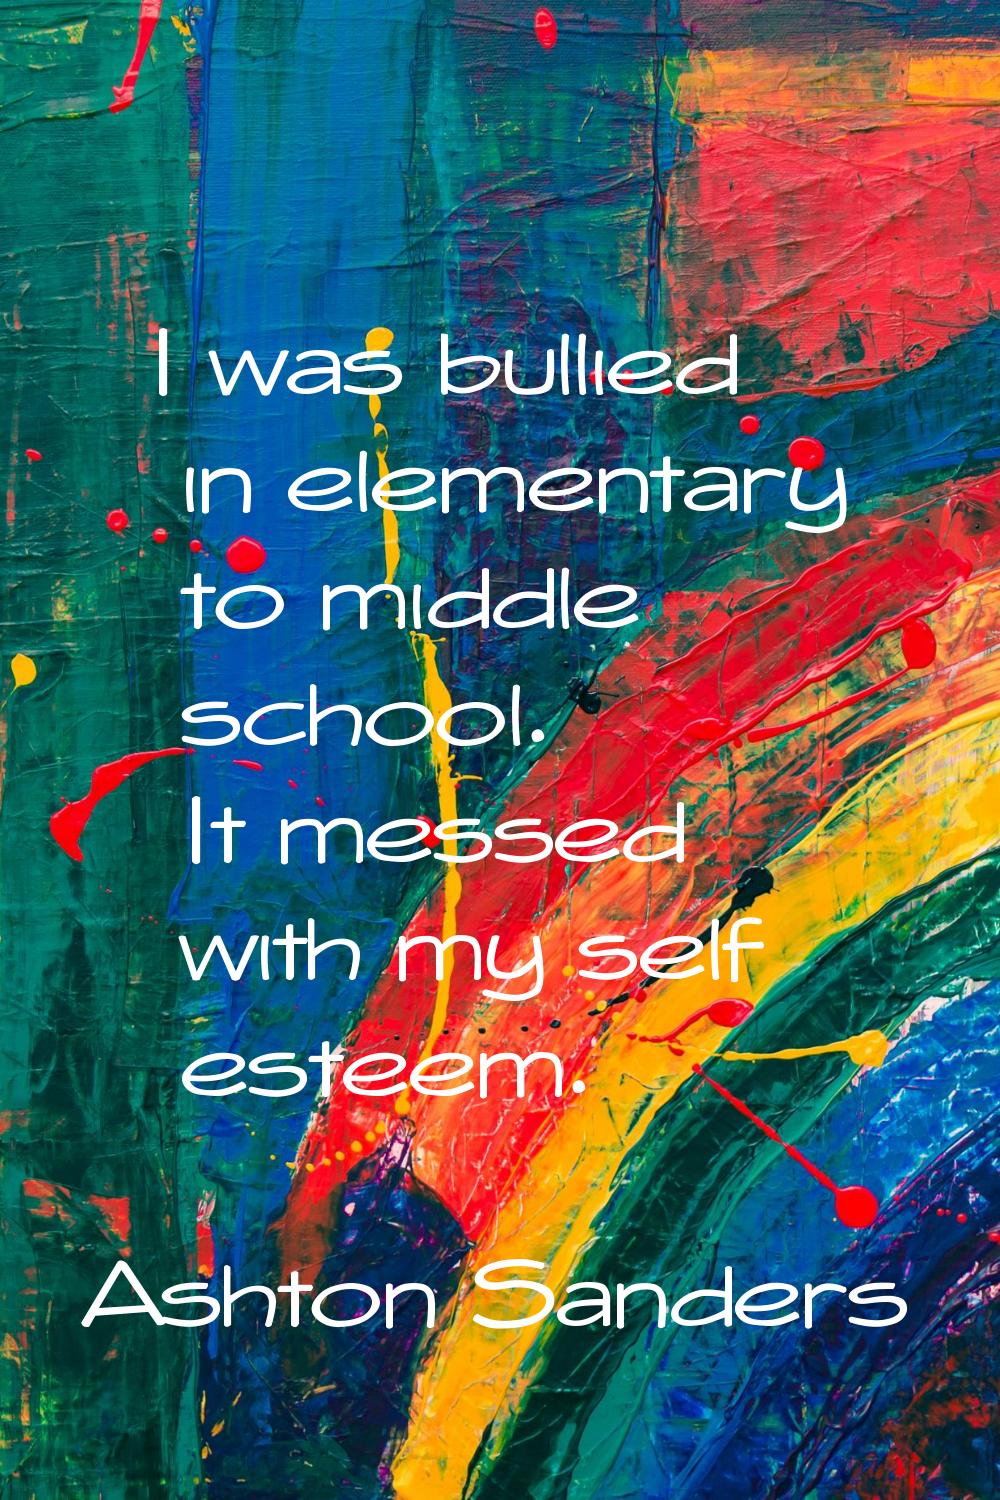 I was bullied in elementary to middle school. It messed with my self esteem.